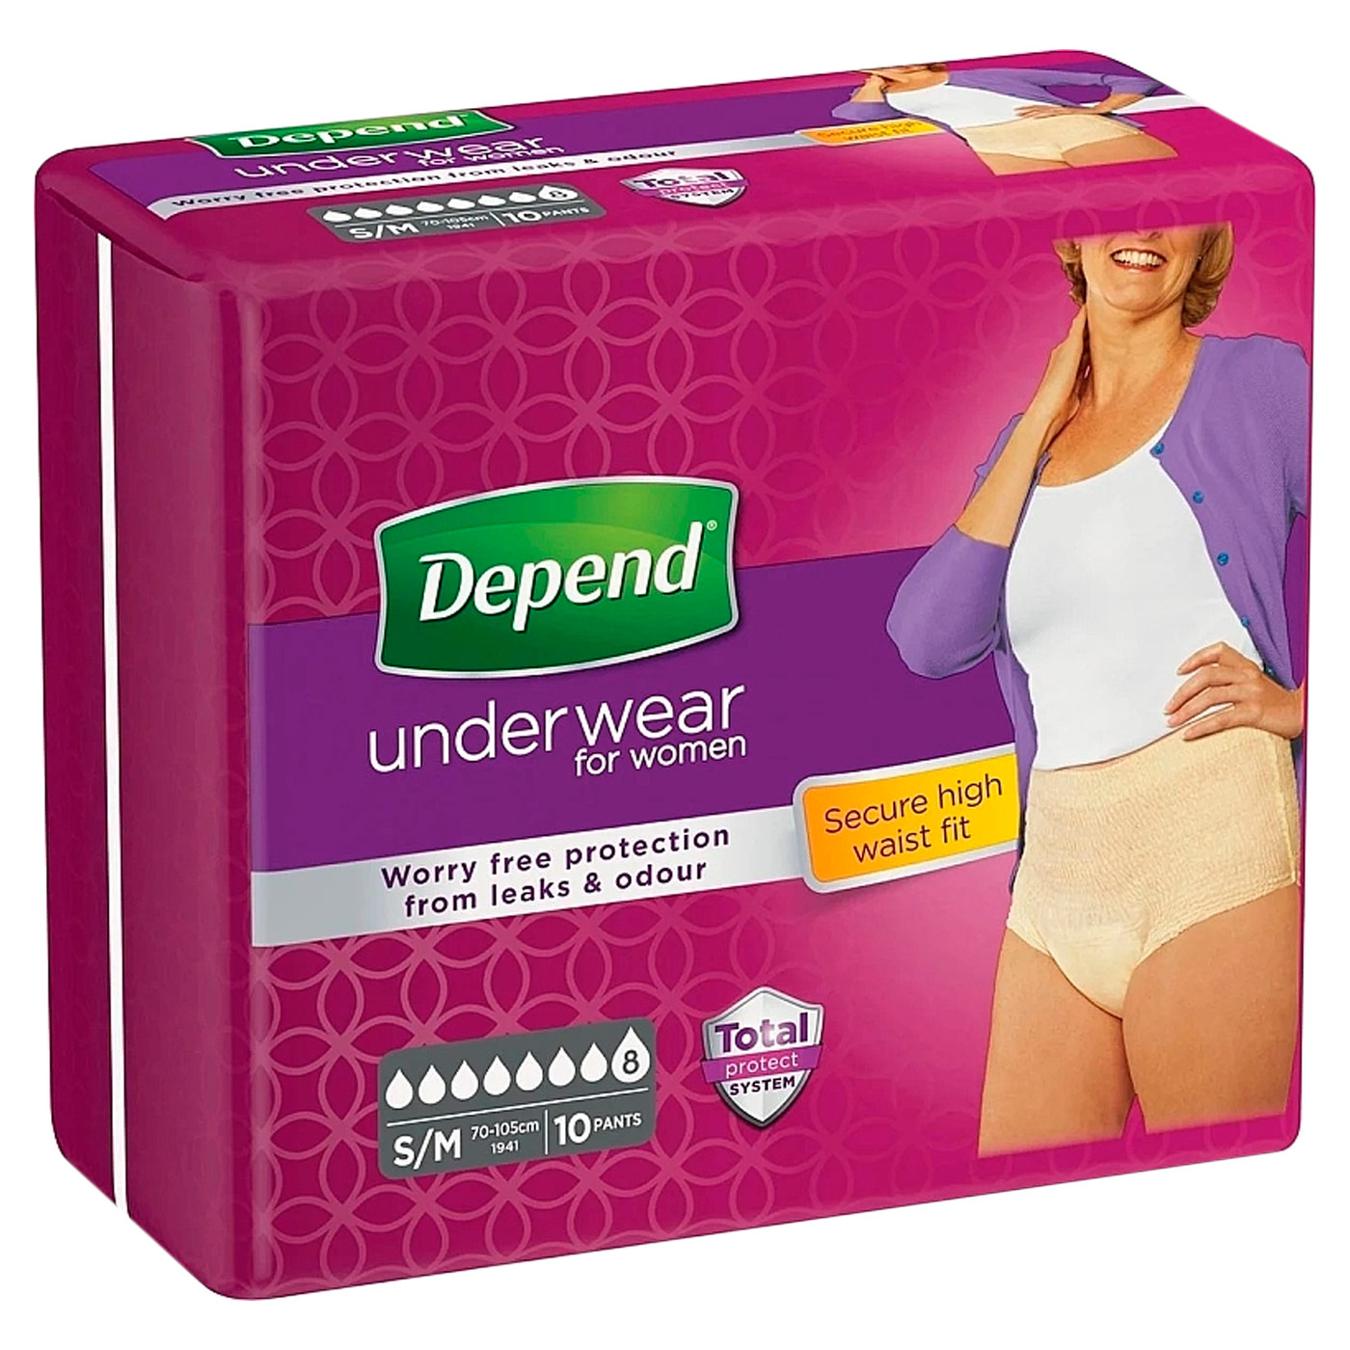 Underwear Depend absorbent panties diapers for adults women size S/M